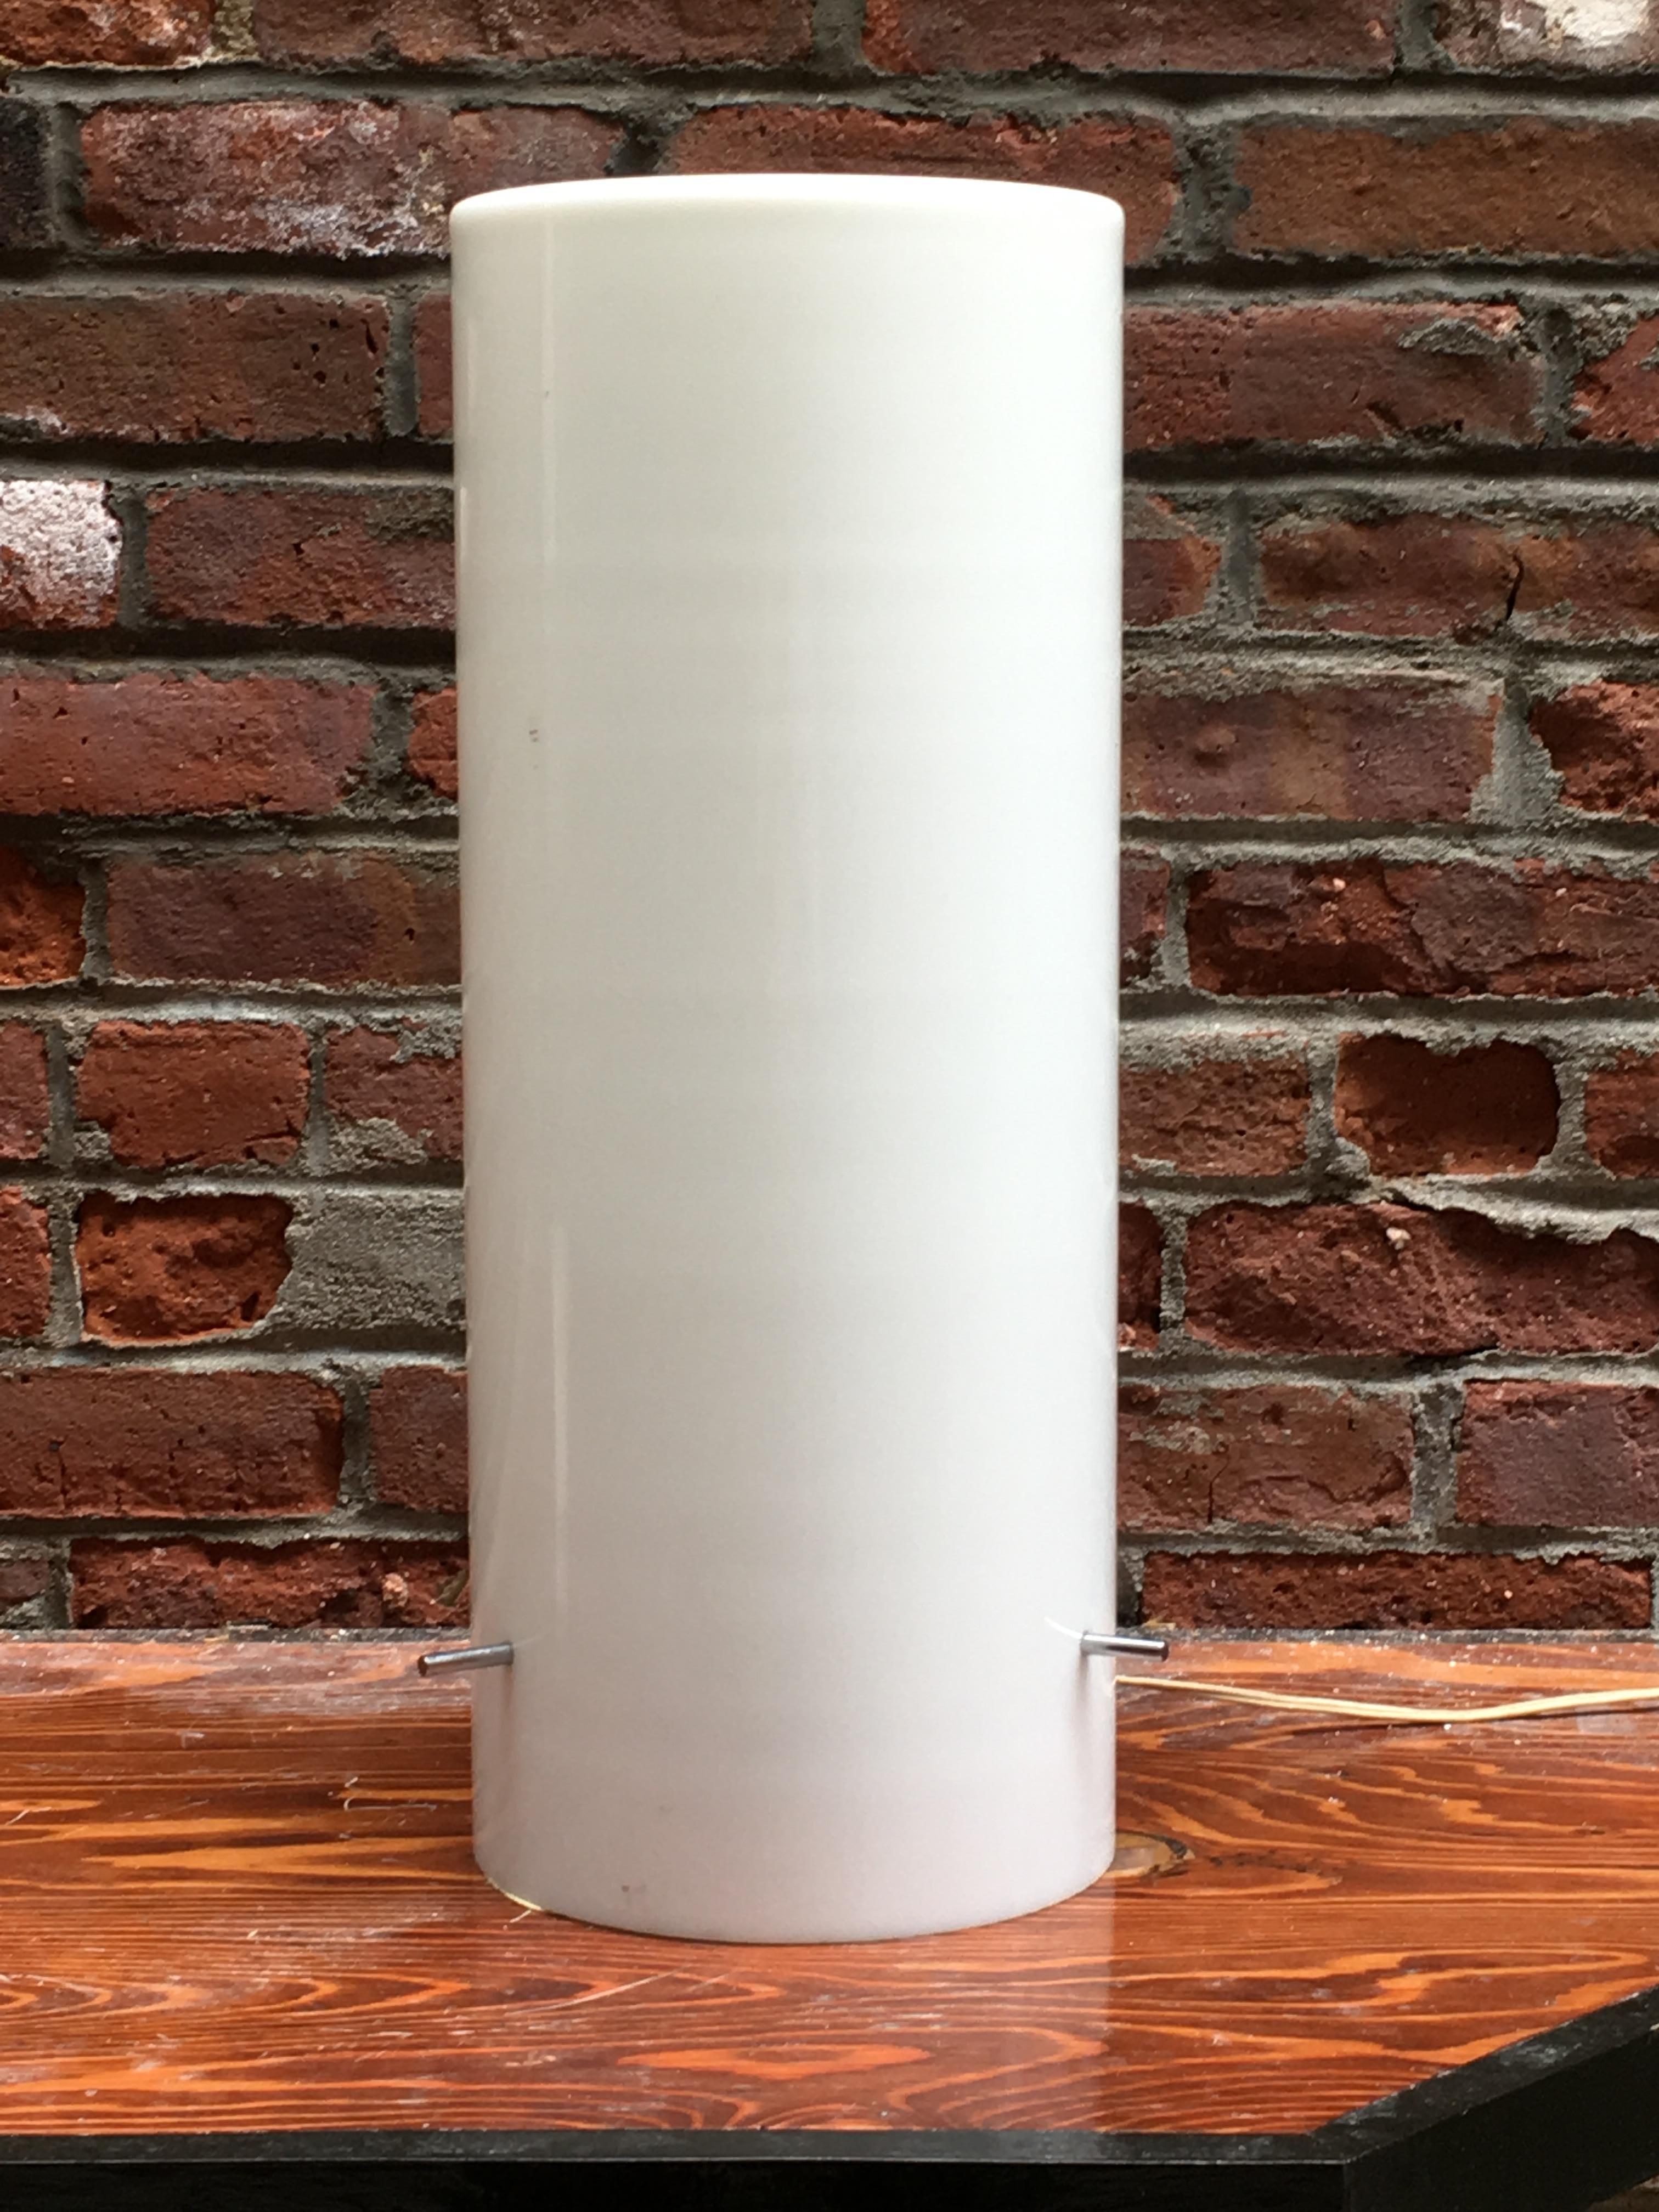 Early white cylindrical hand blown cased glass with chrome fittings. Designed by Paul Mayen and for Habitat. An early glass example before it was switched over to white Lucite or Lumacryl, circa 1960. The single bulb fixture throws off a warm,